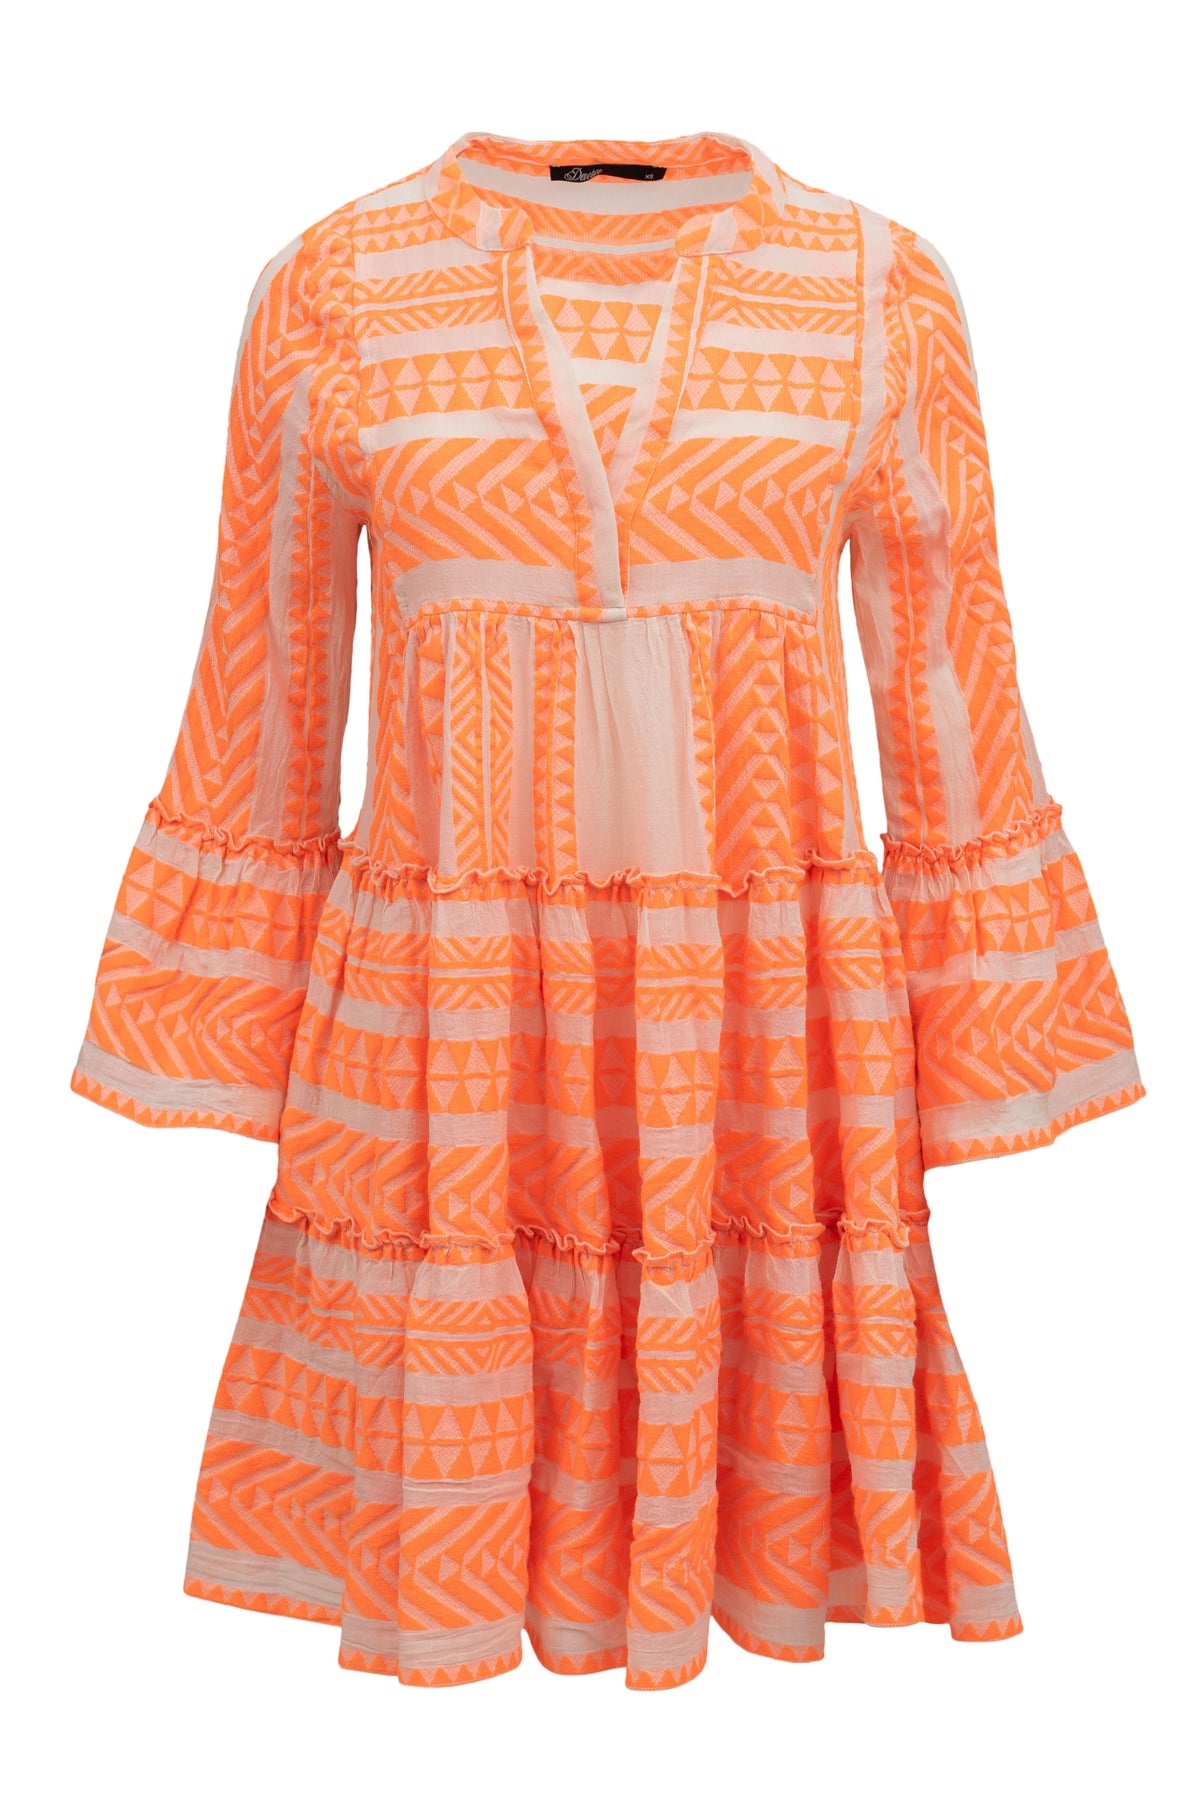 Ecru and neon orange beach dress knee length with tiered skirt notch neck and flared long sleeves